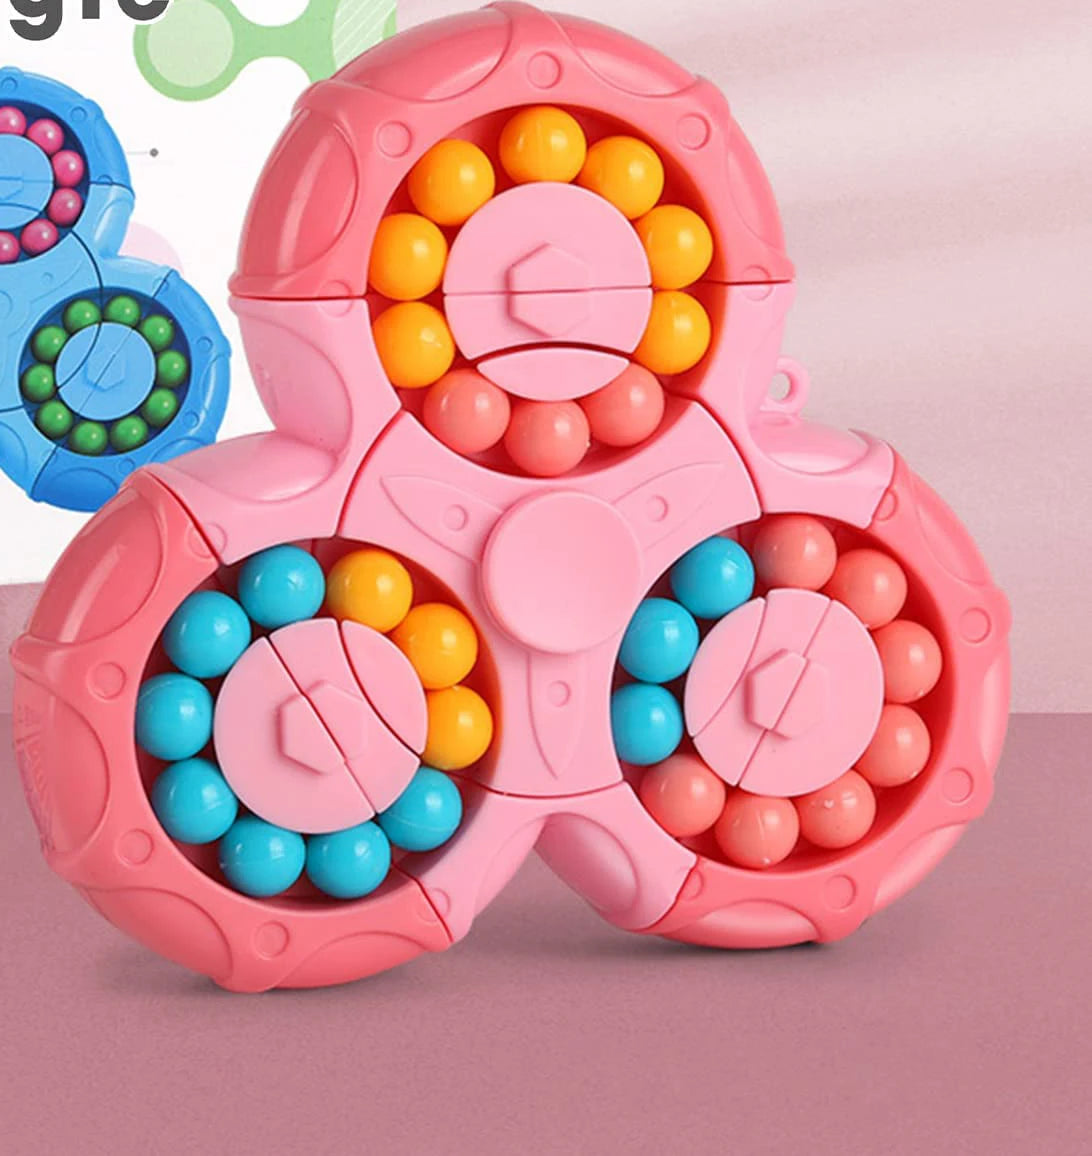 Rotating Magic Bean Fidget Toy Hand Spinner Office Relief Stress Anxiety Decompression Puzzle Cube Educational Beads Kids Adults pink